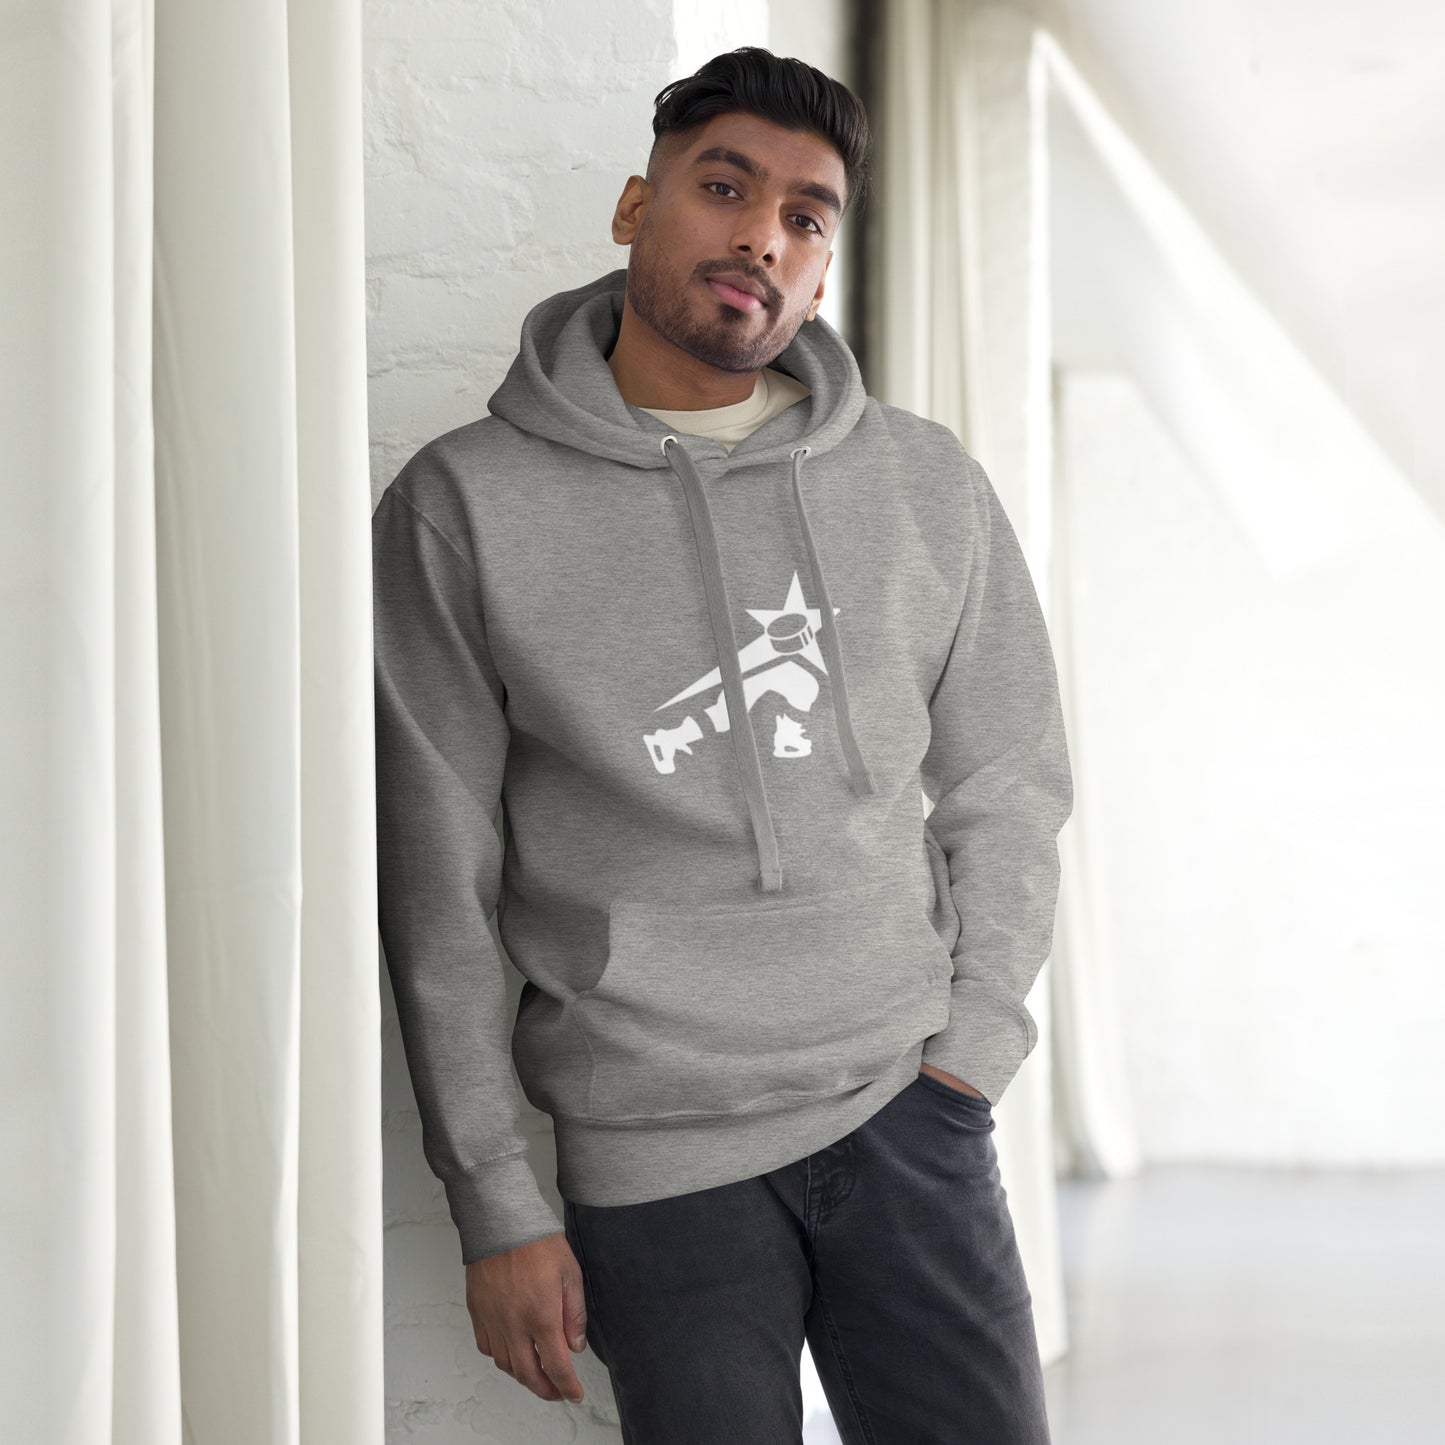 Confident man wearing a gray heather gray hoodie 